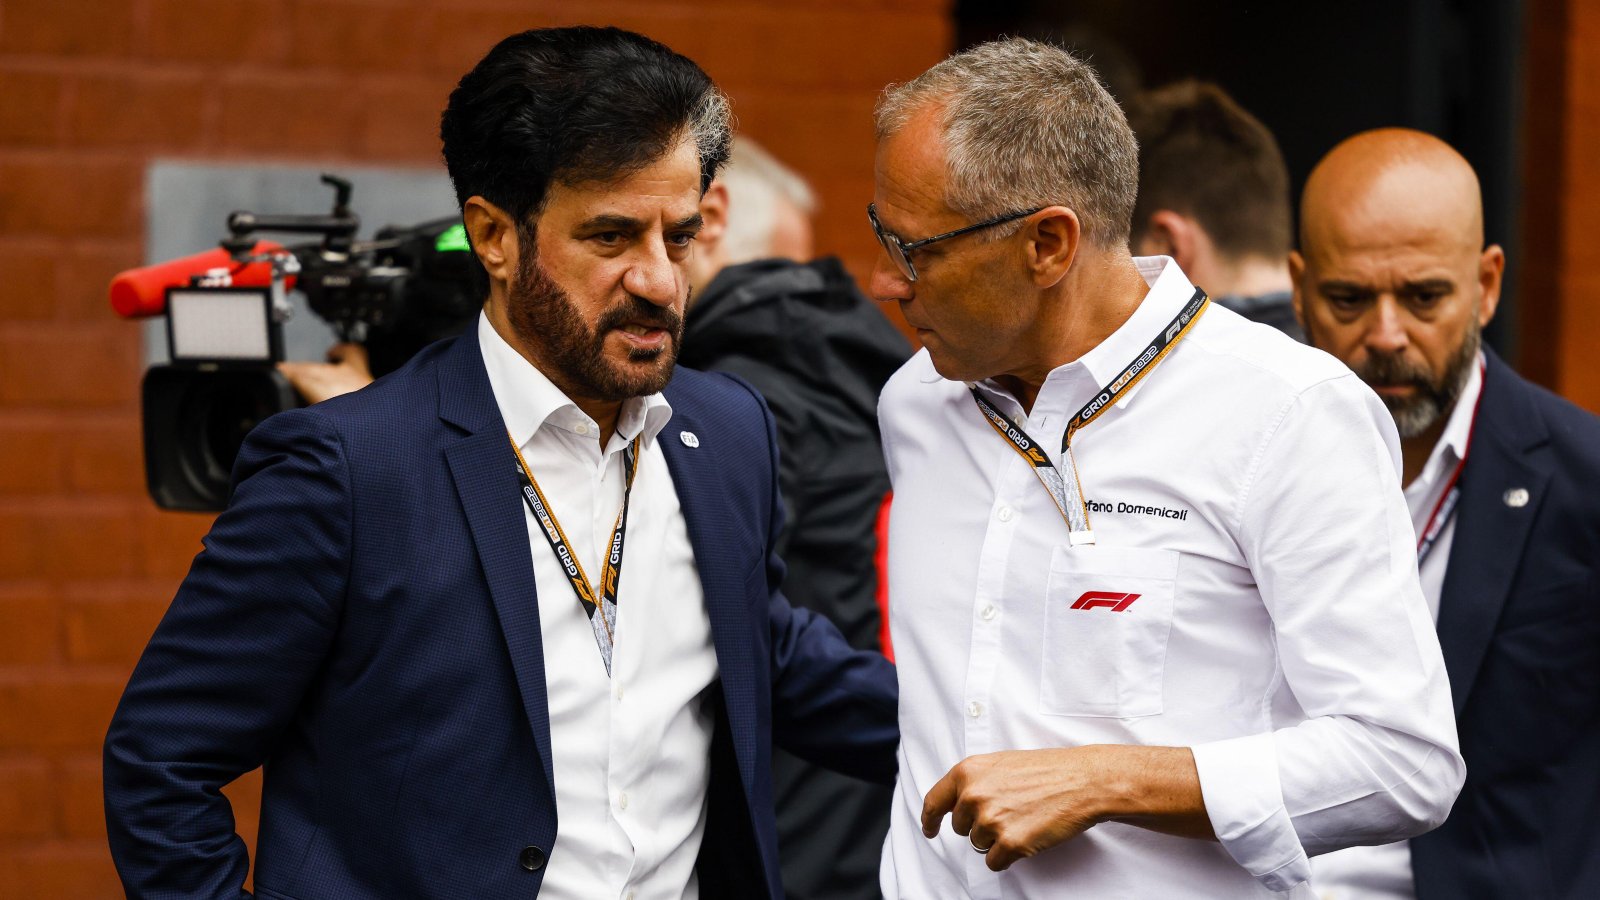 Mohammed Ben Sulayem and Stefano Domenicali. Spa, Belgium. August, 2022